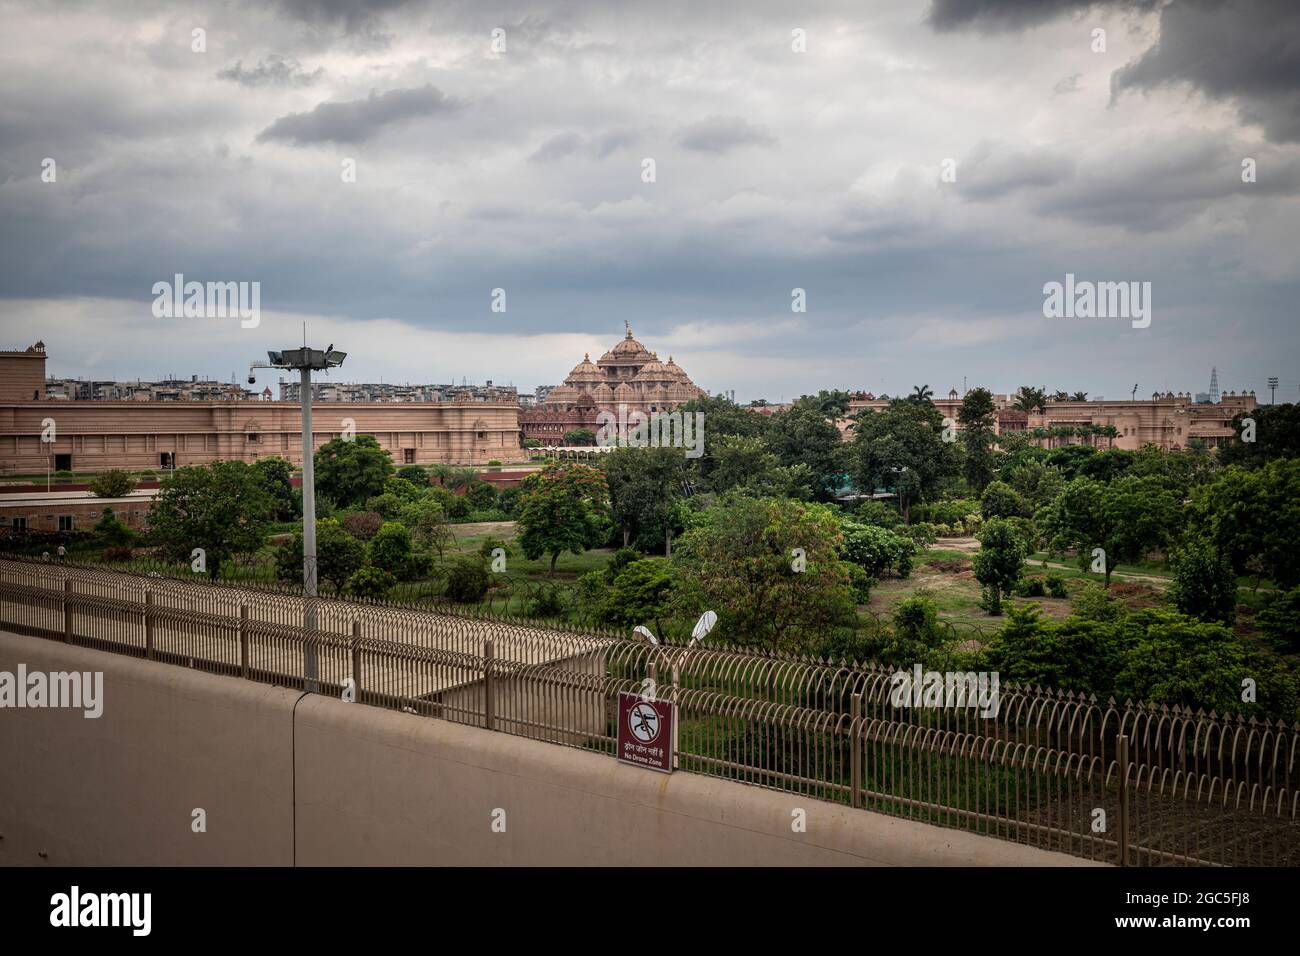 Wide angle view of the famous Akshardham temple in New Delhi Stock Photo